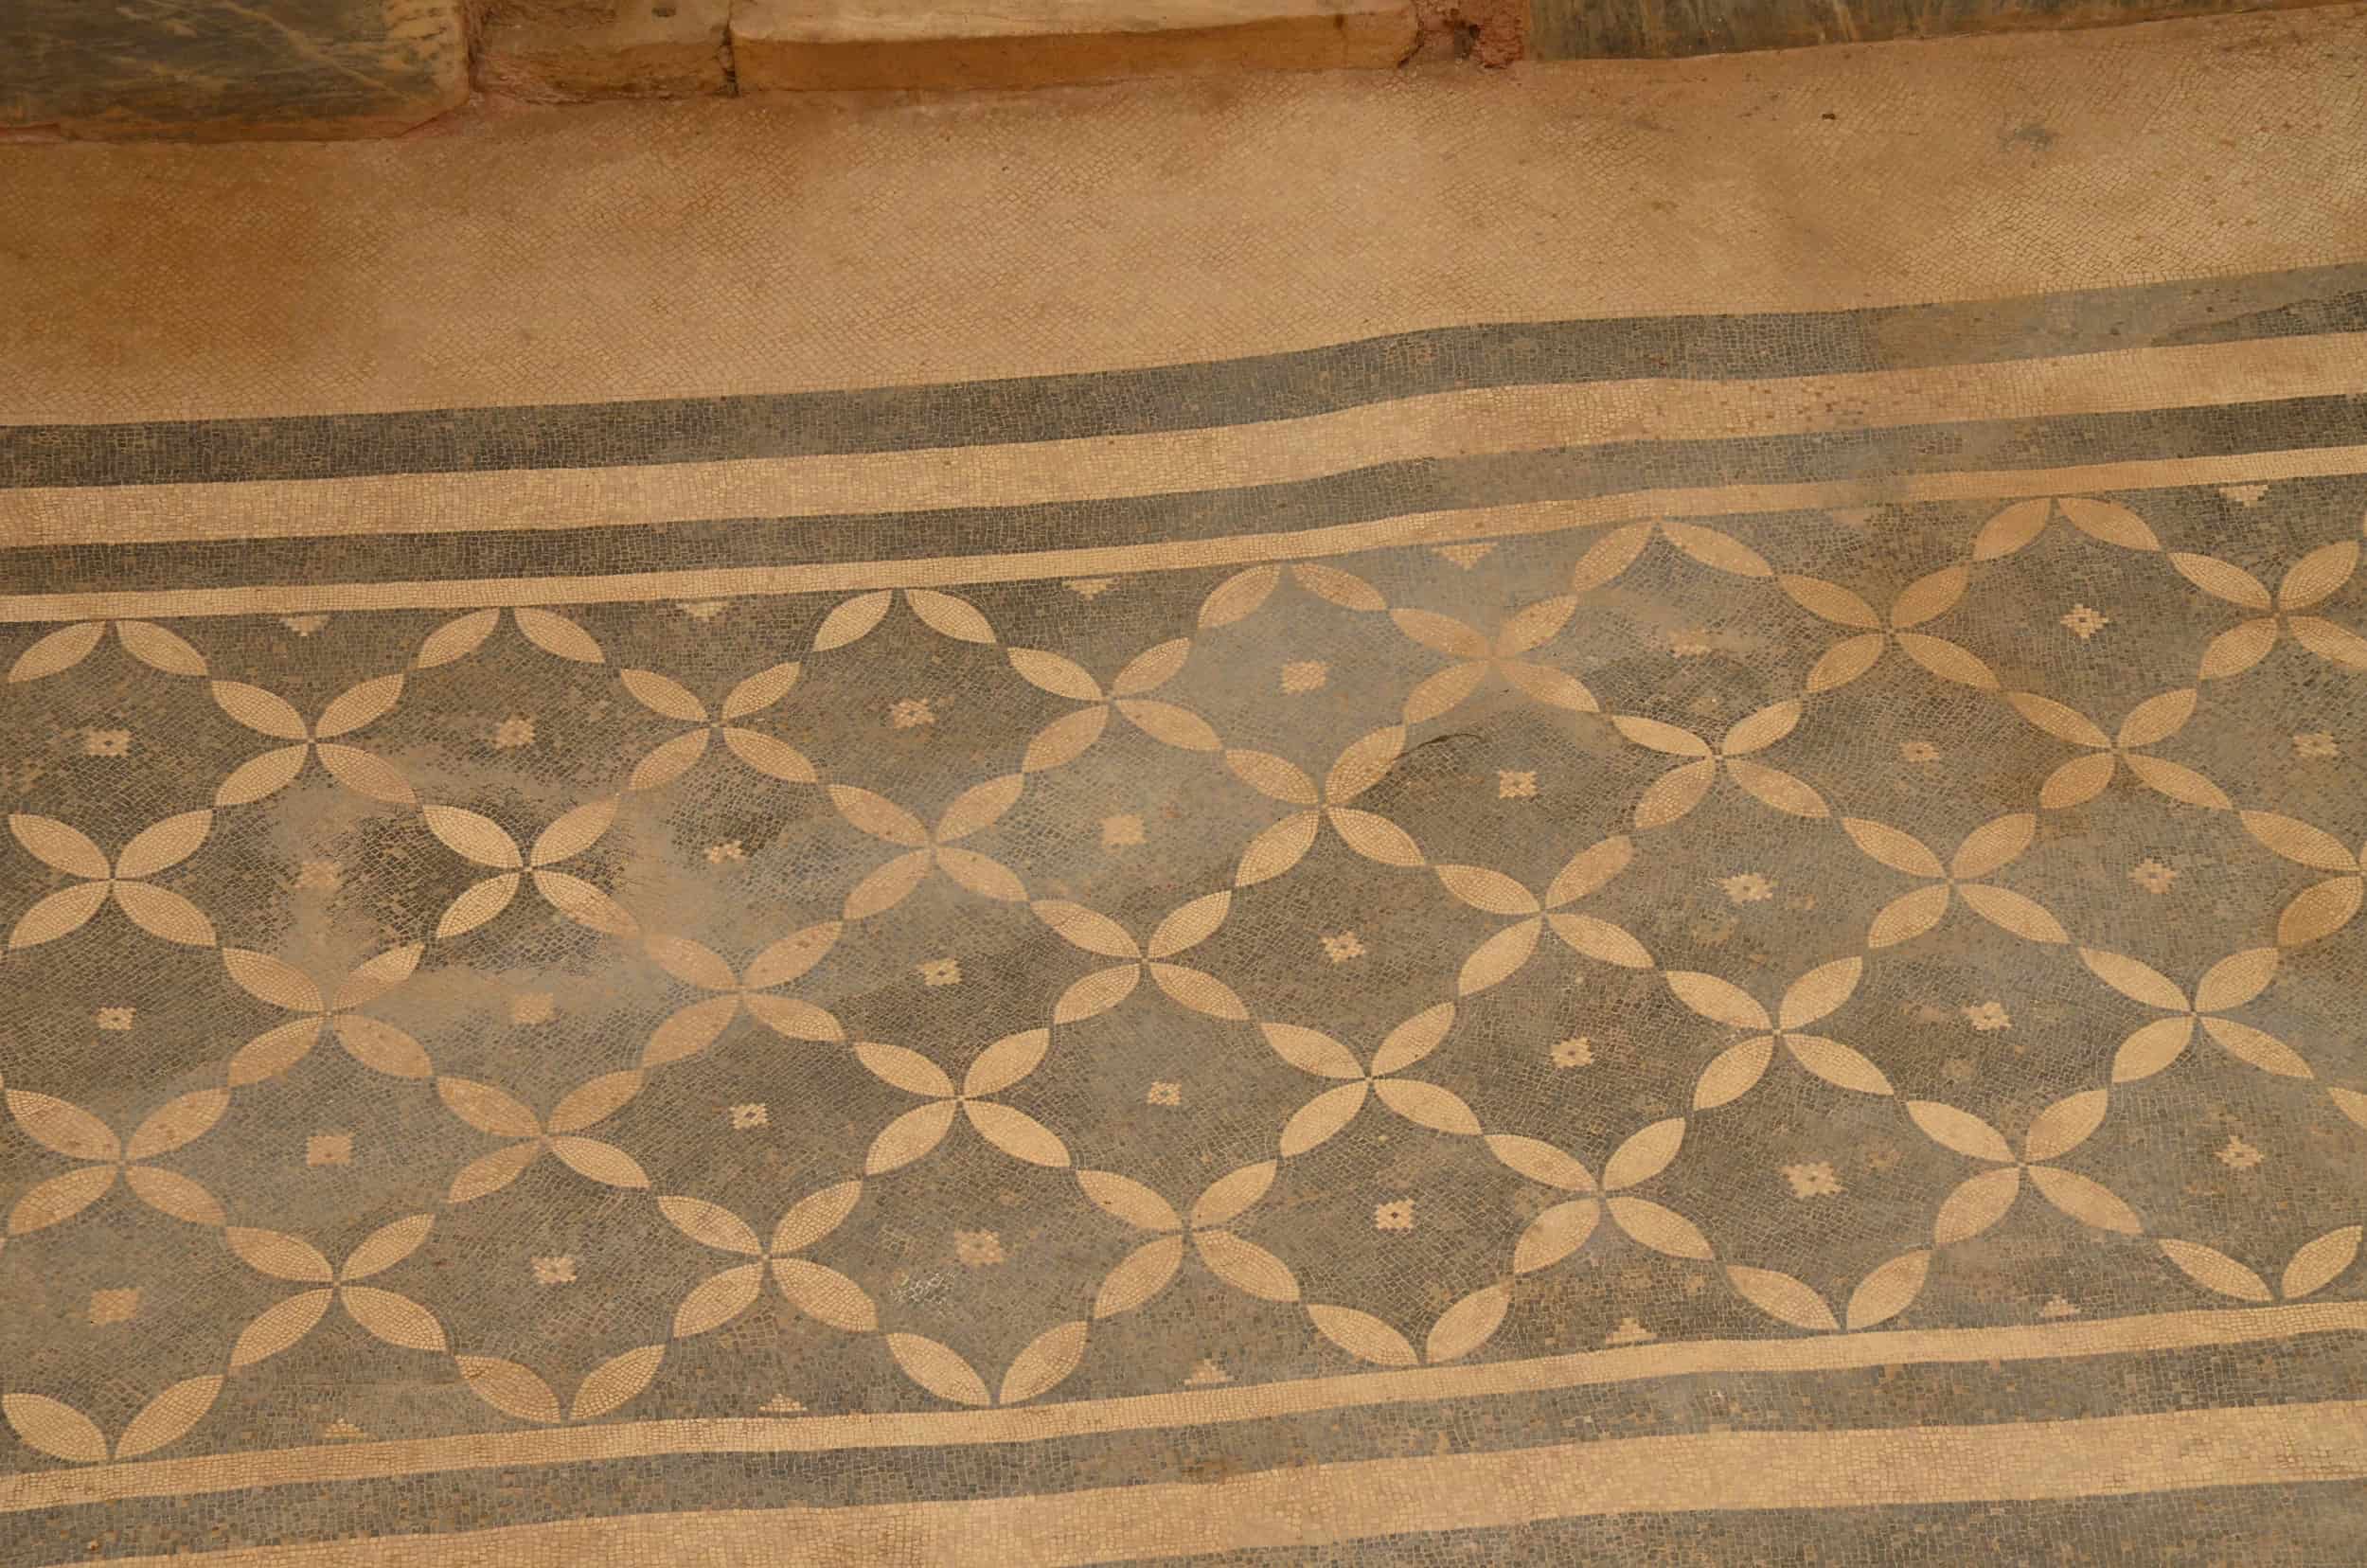 Mosaic floor on the north side of the central peristyle courtyard in Dwelling Unit 2 in the Terrace Houses at Ephesus